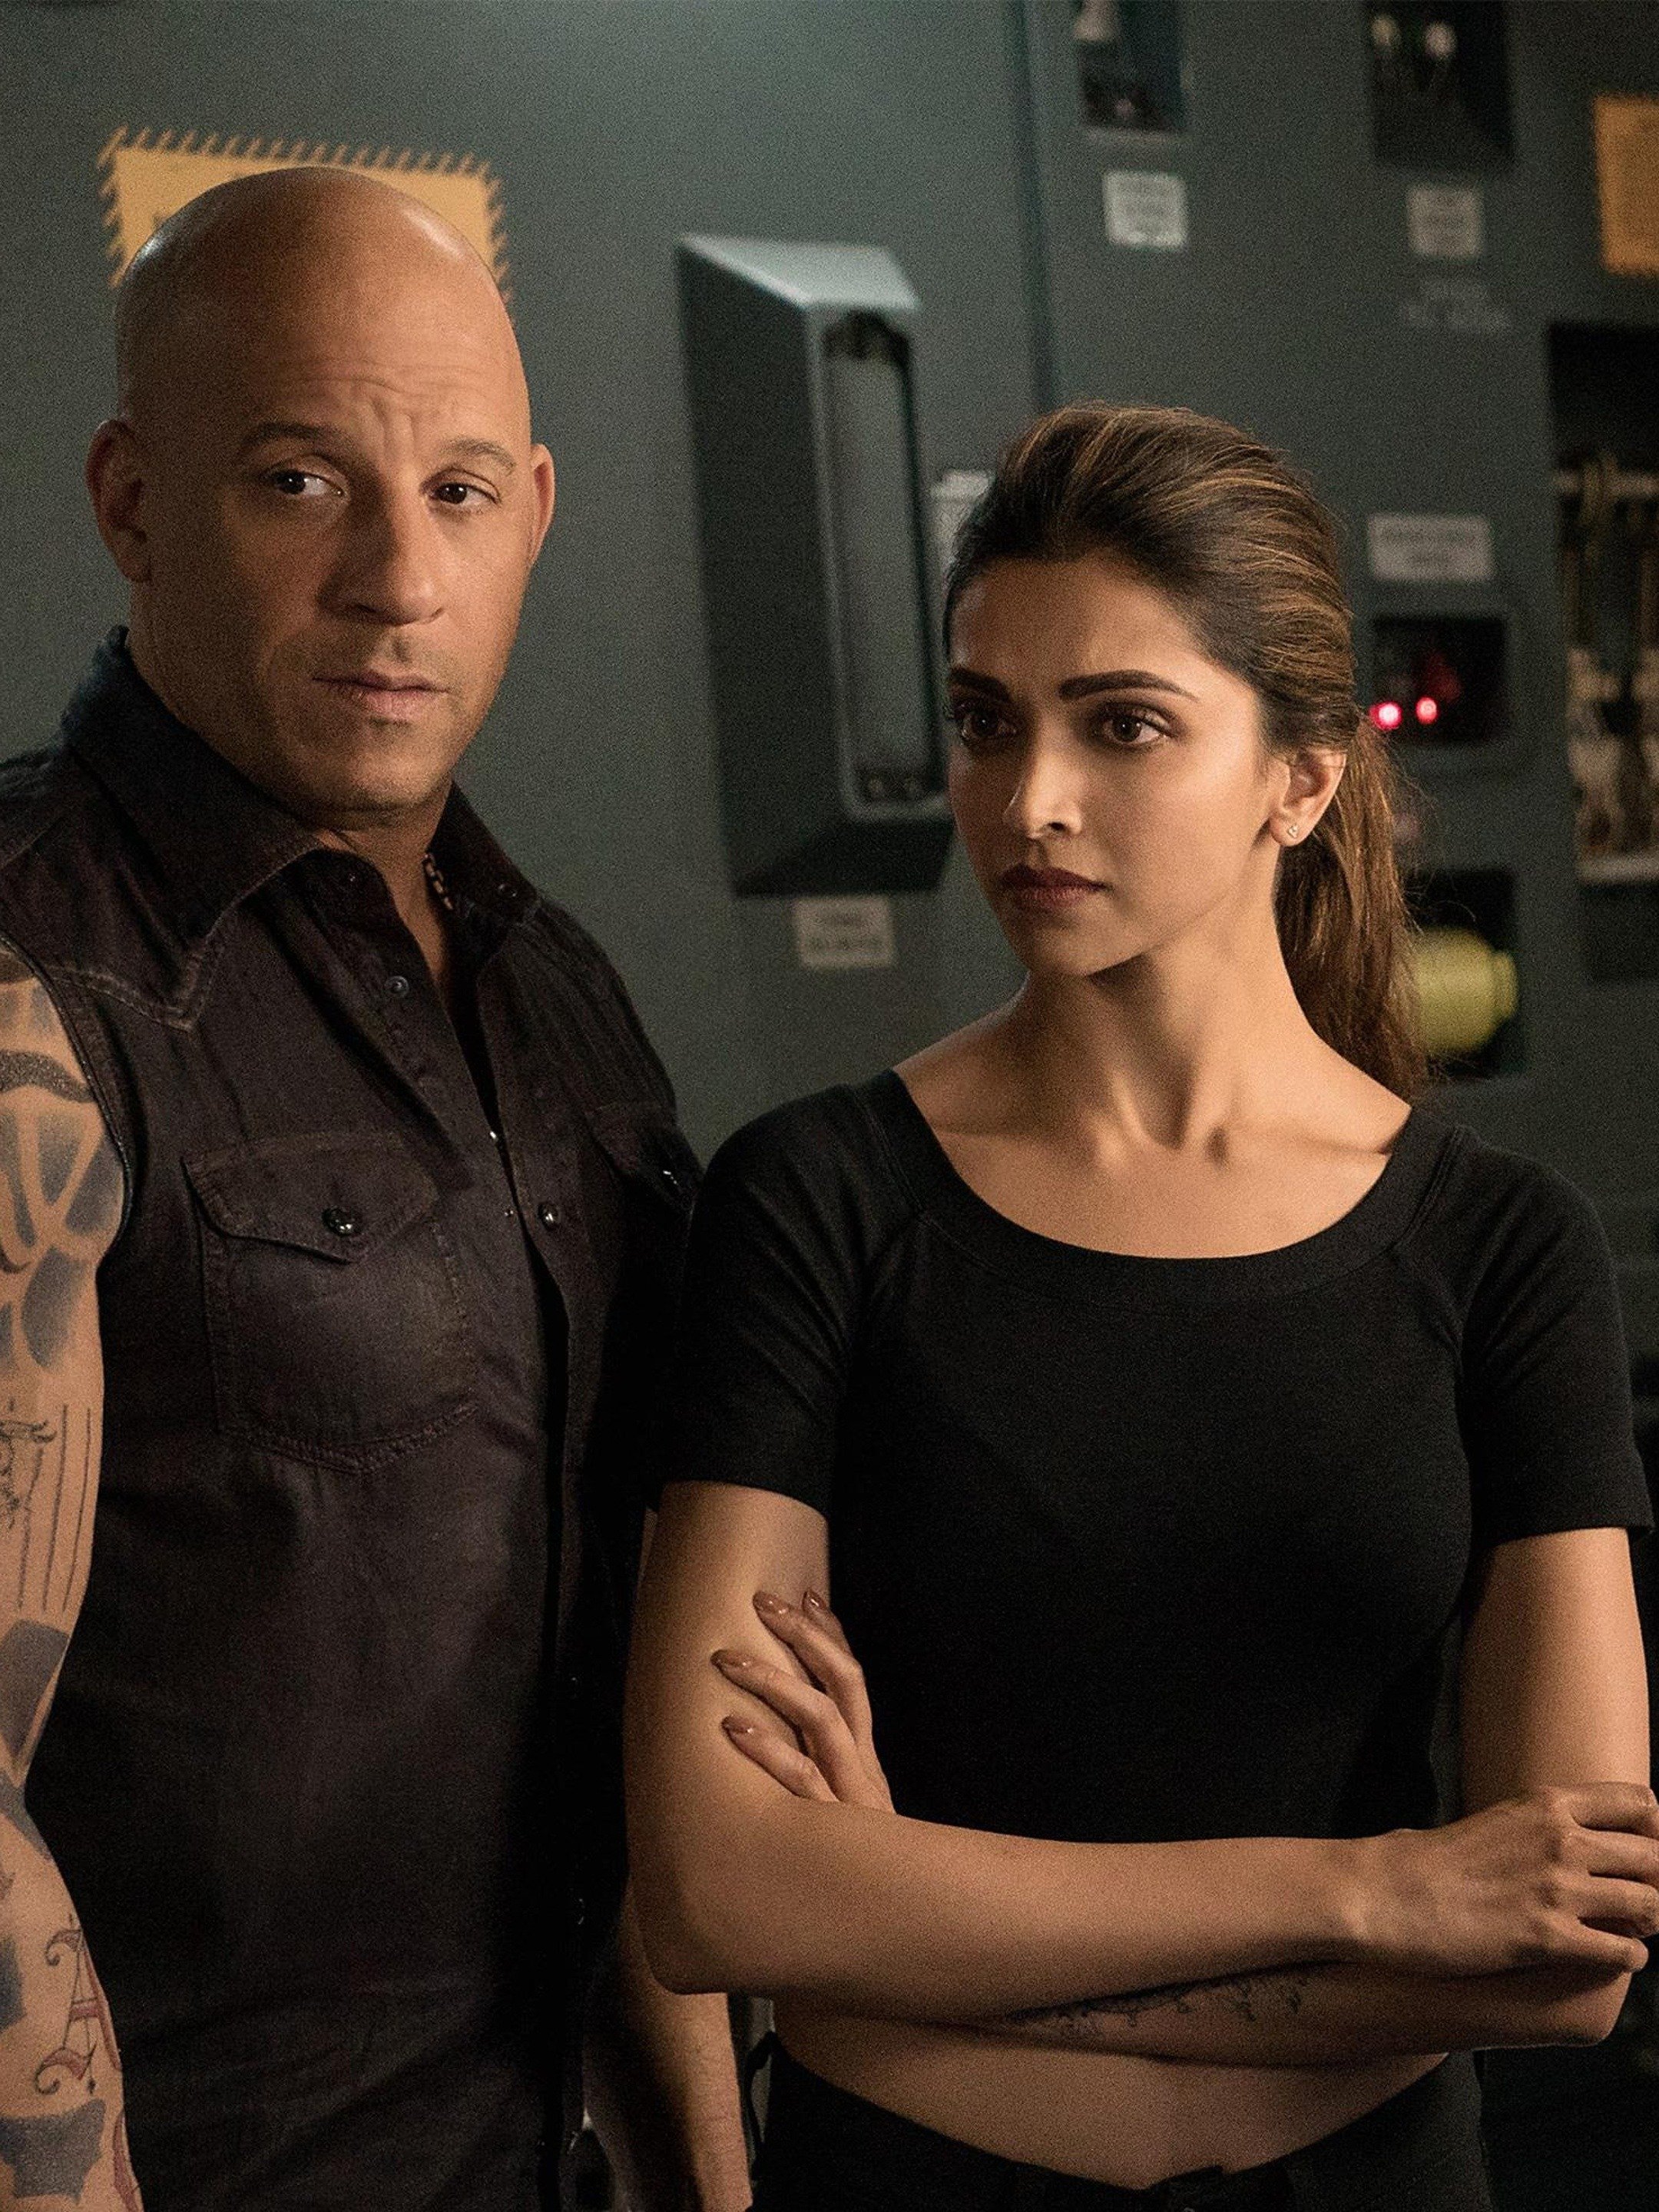 xXx: Return of Xander Cage - Rotten Tomatoes